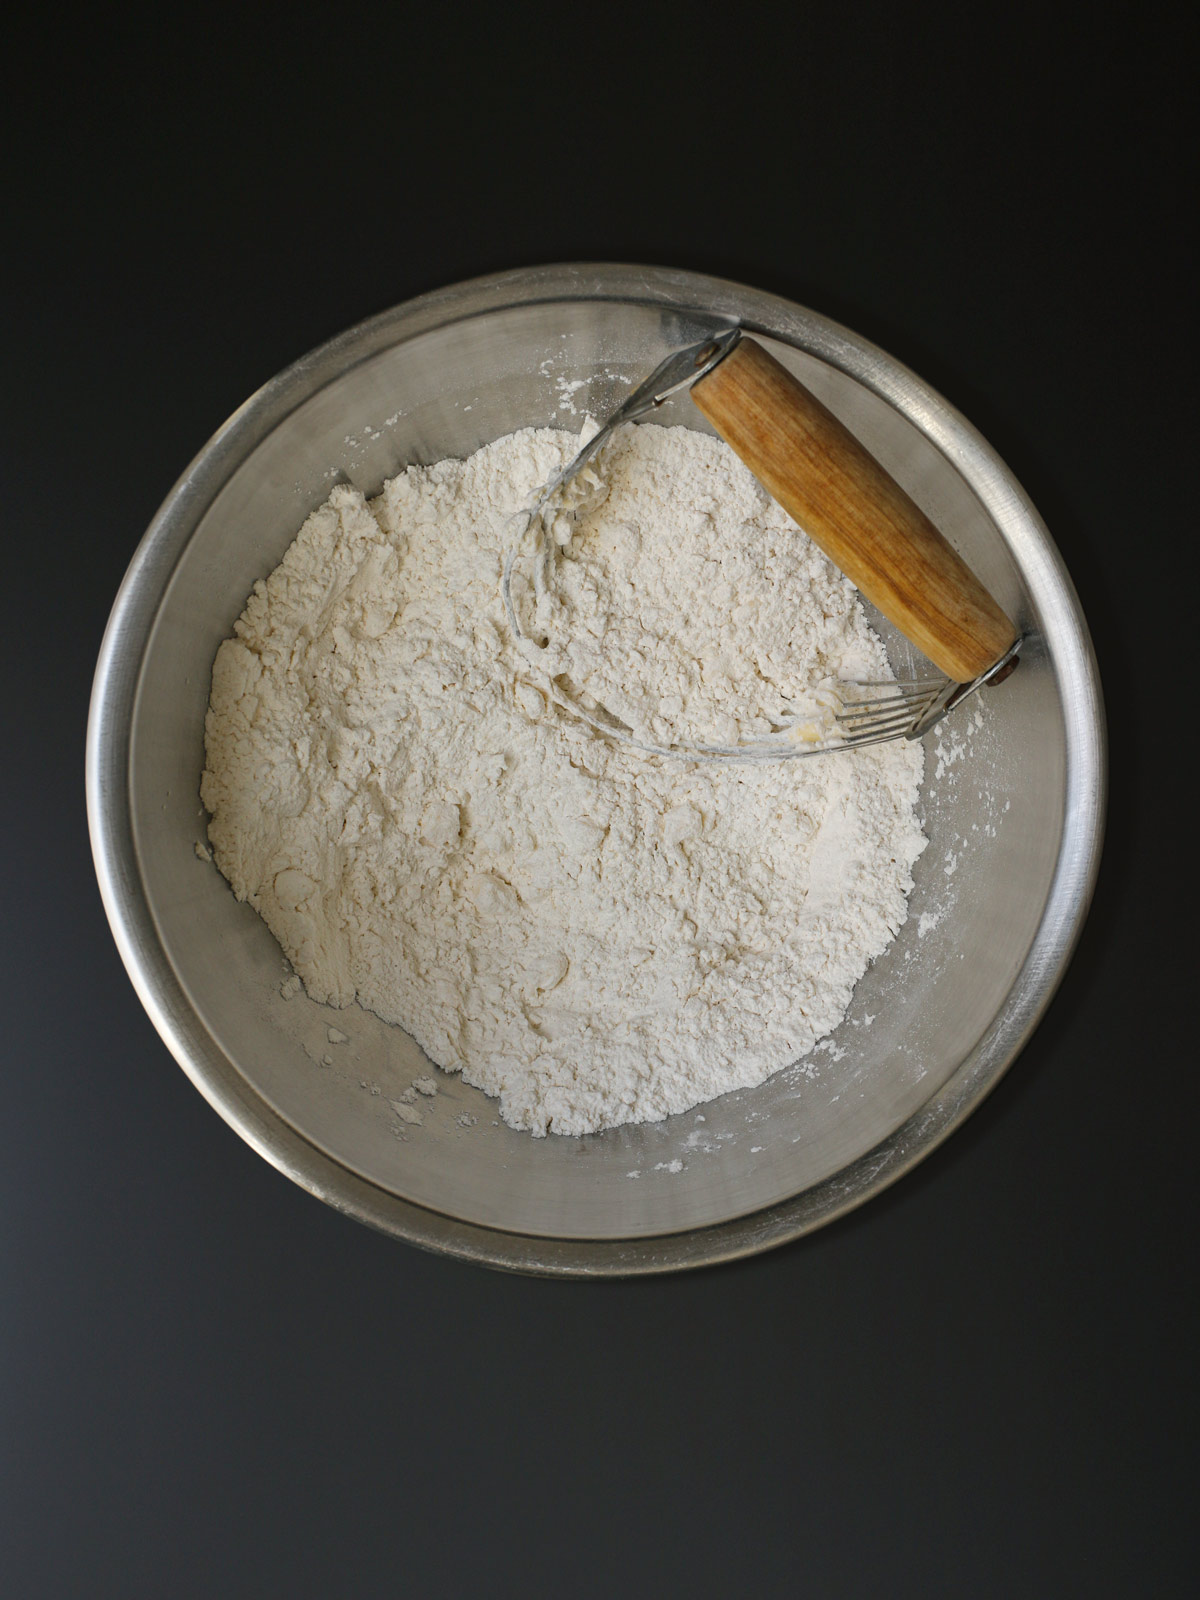 pastry blender in bowl with flour and butter worked into crumbs.